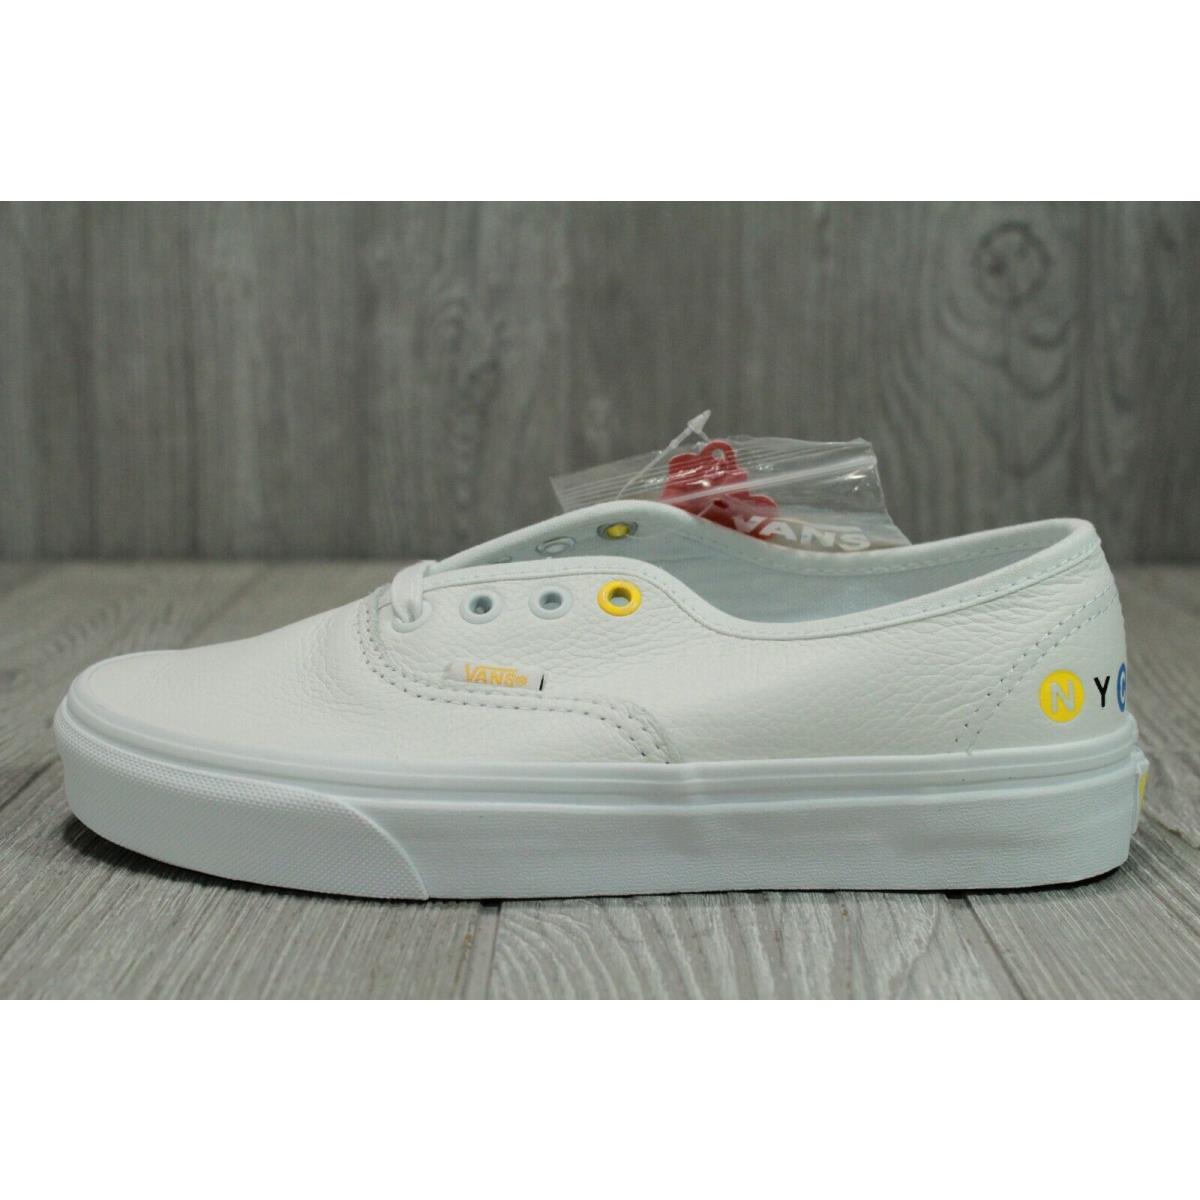 Vans Old Skool Nyc York Subway White Lace Up Shoes Mens 6 13 Womens 7.5